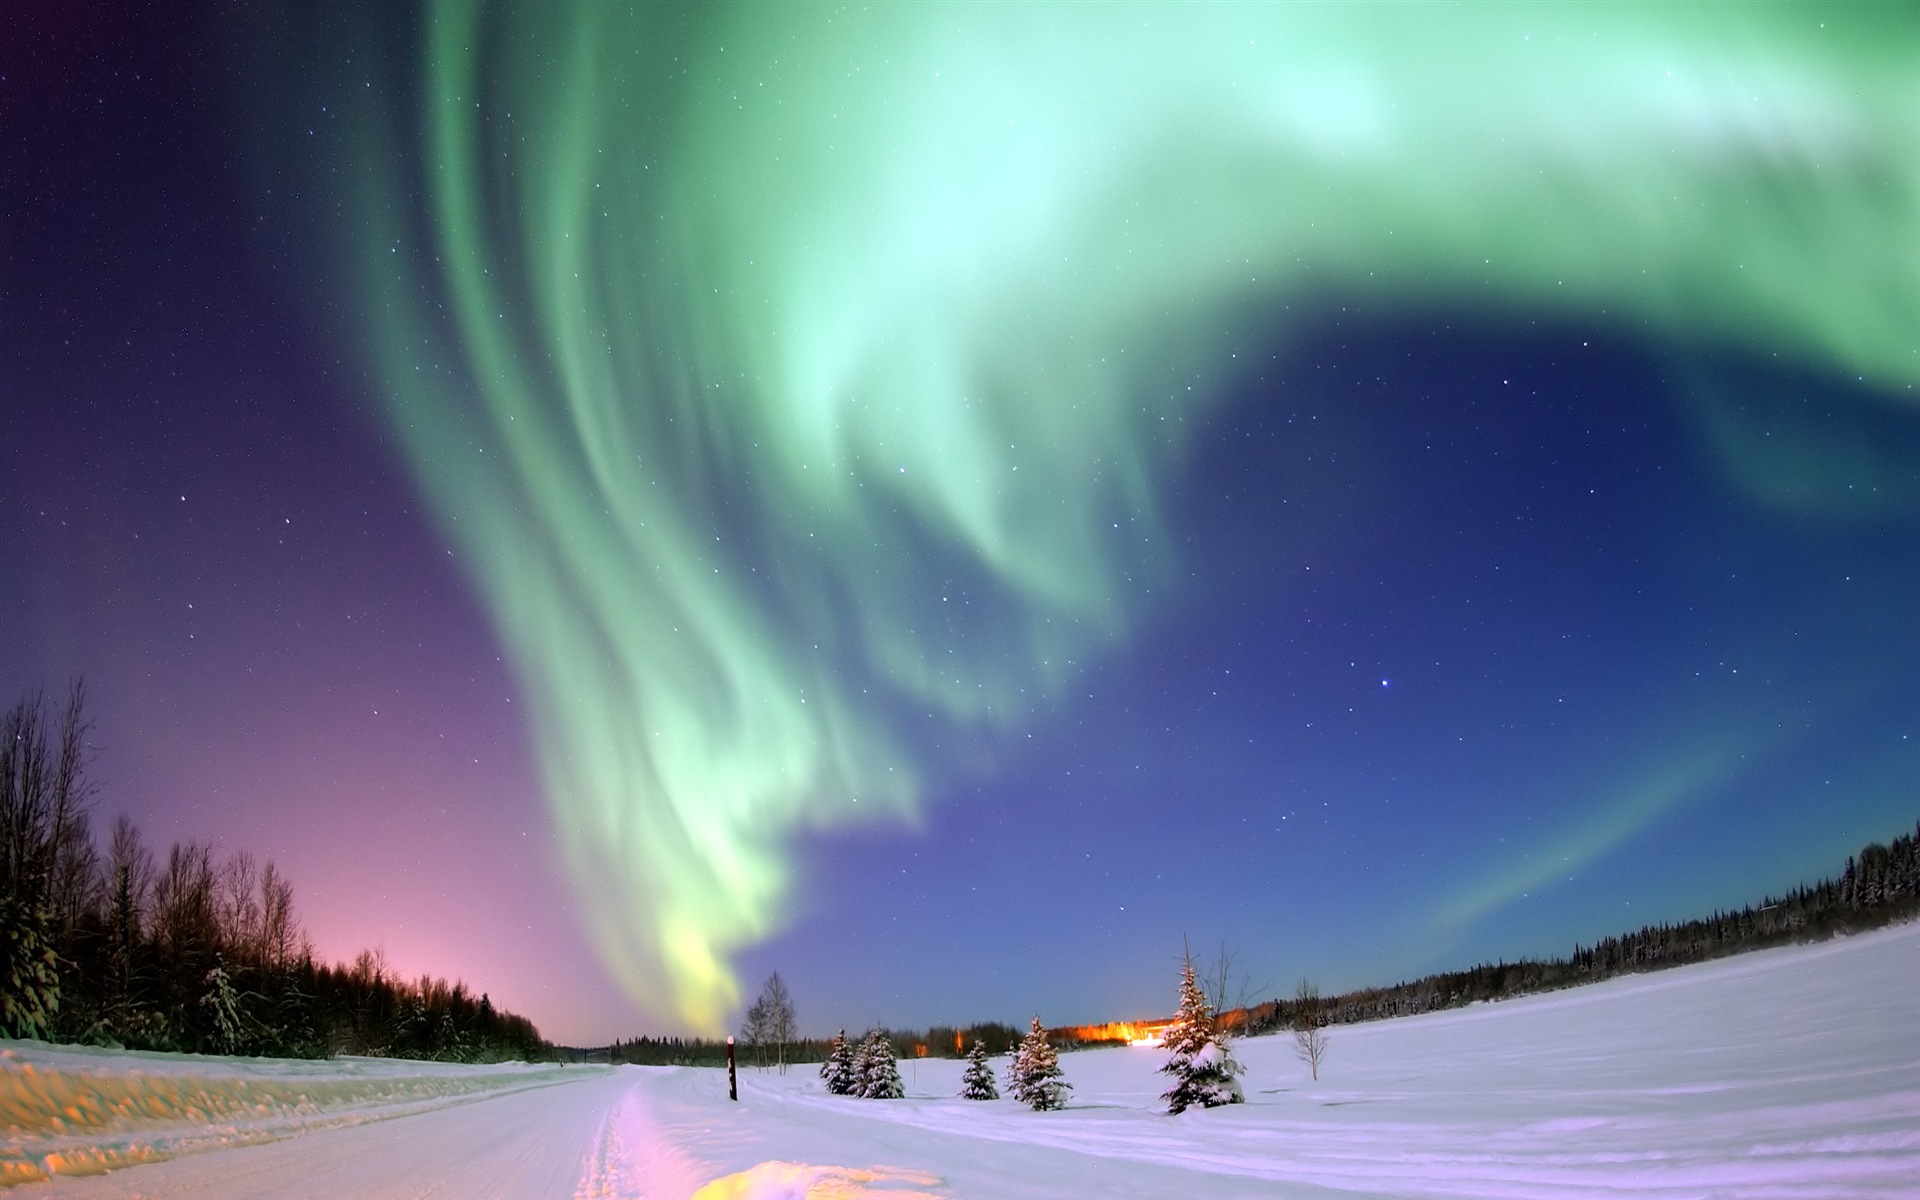 Natural wonders of the Northern Lights HD Wallpaper (2) #22 - 1920x1200